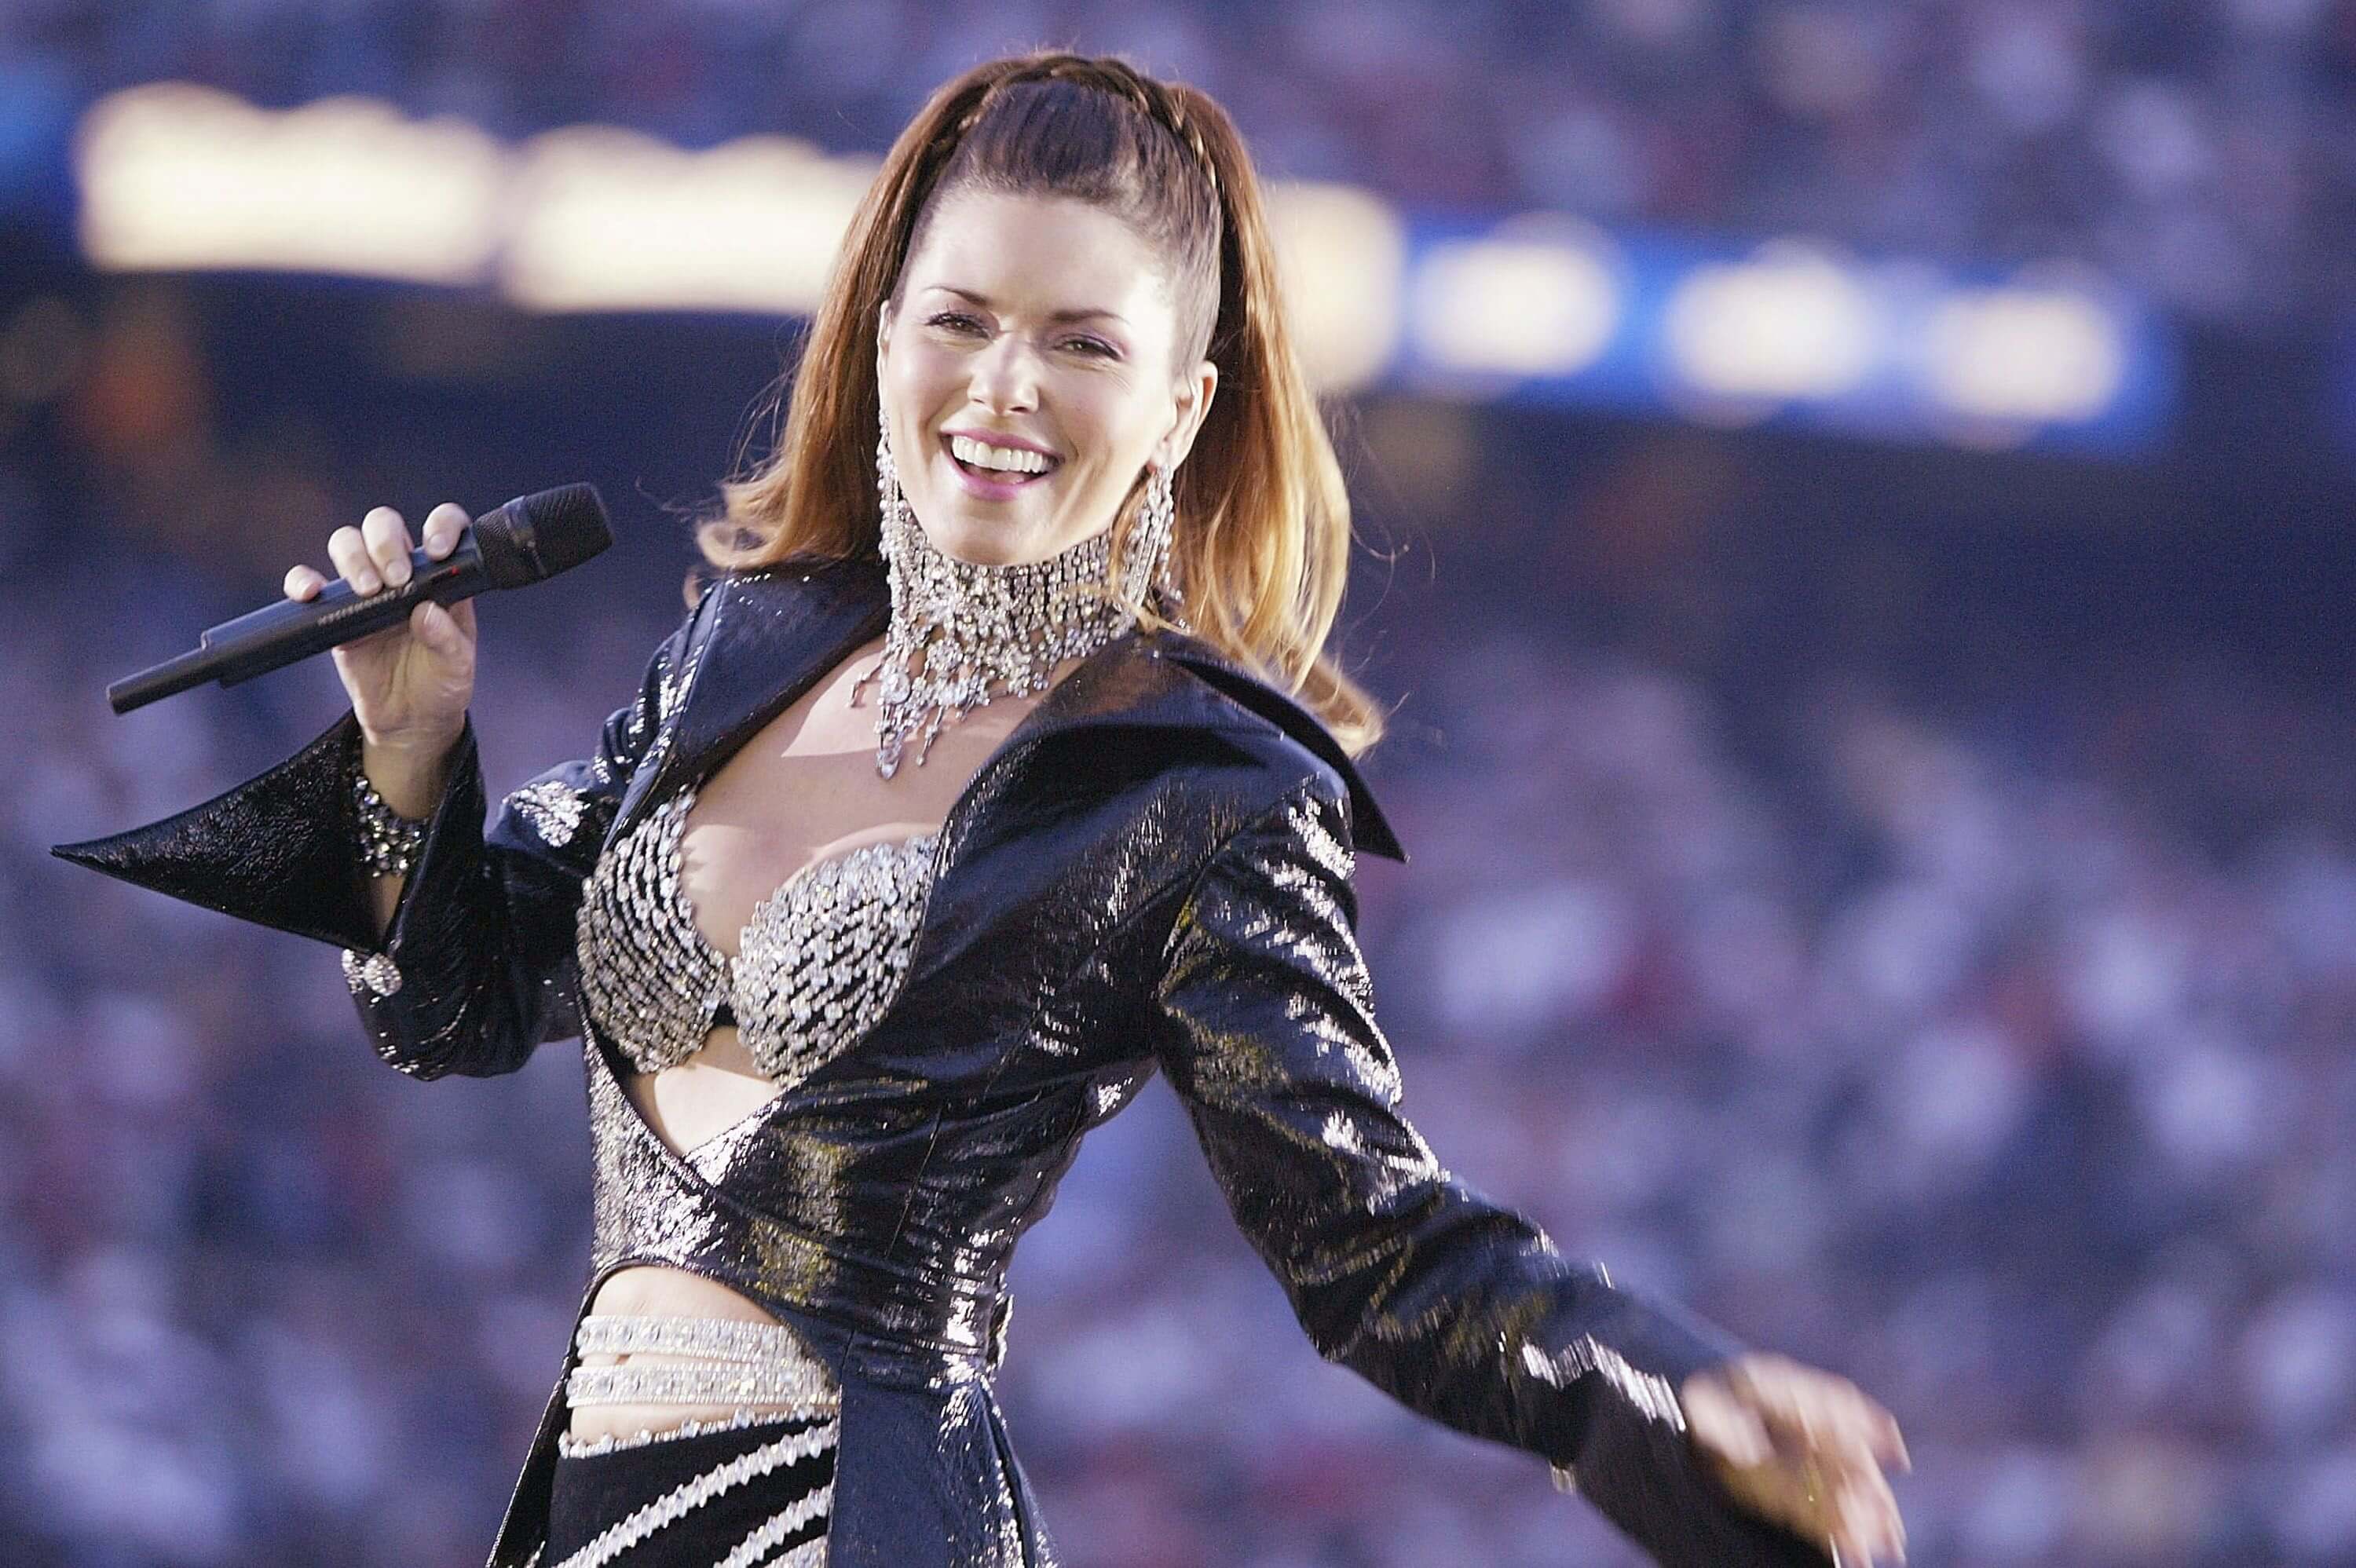 65+ Hot Pictures Of Shania Twain Will Drive You Nuts For Her | Best Of Comic Books